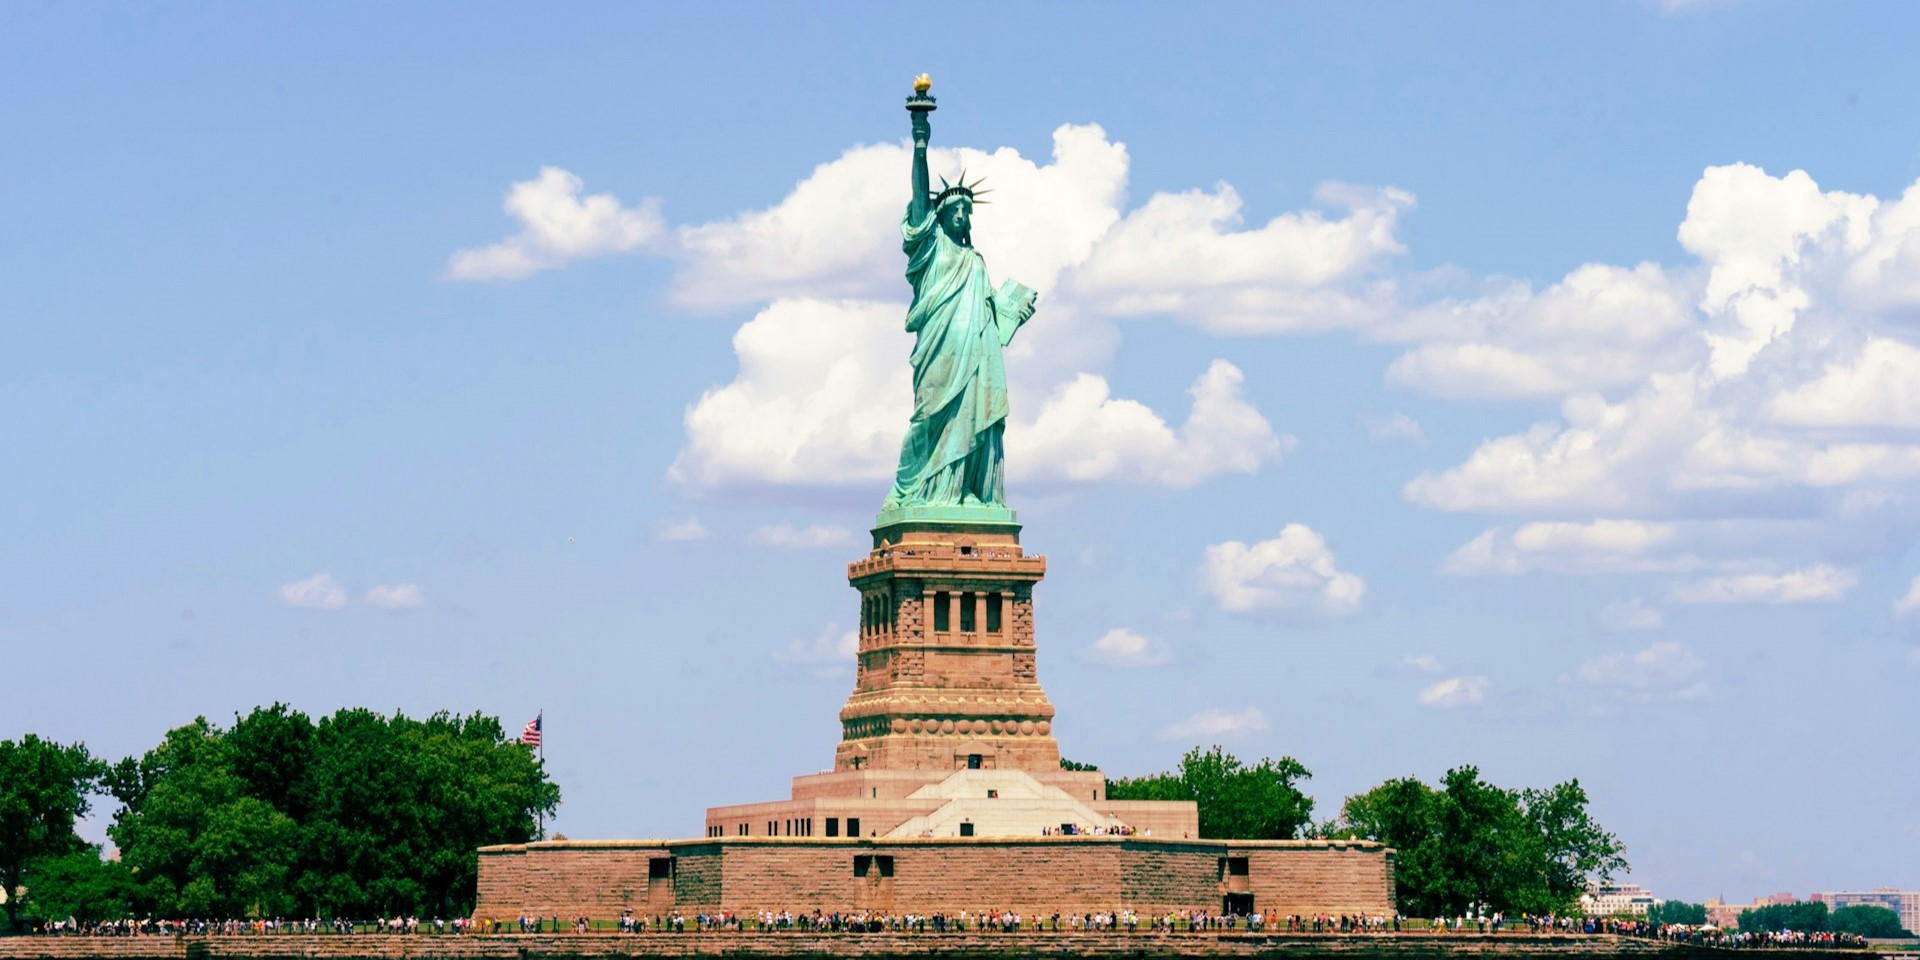 How the Statue of Liberty Became the Symbol for "The American Dream"